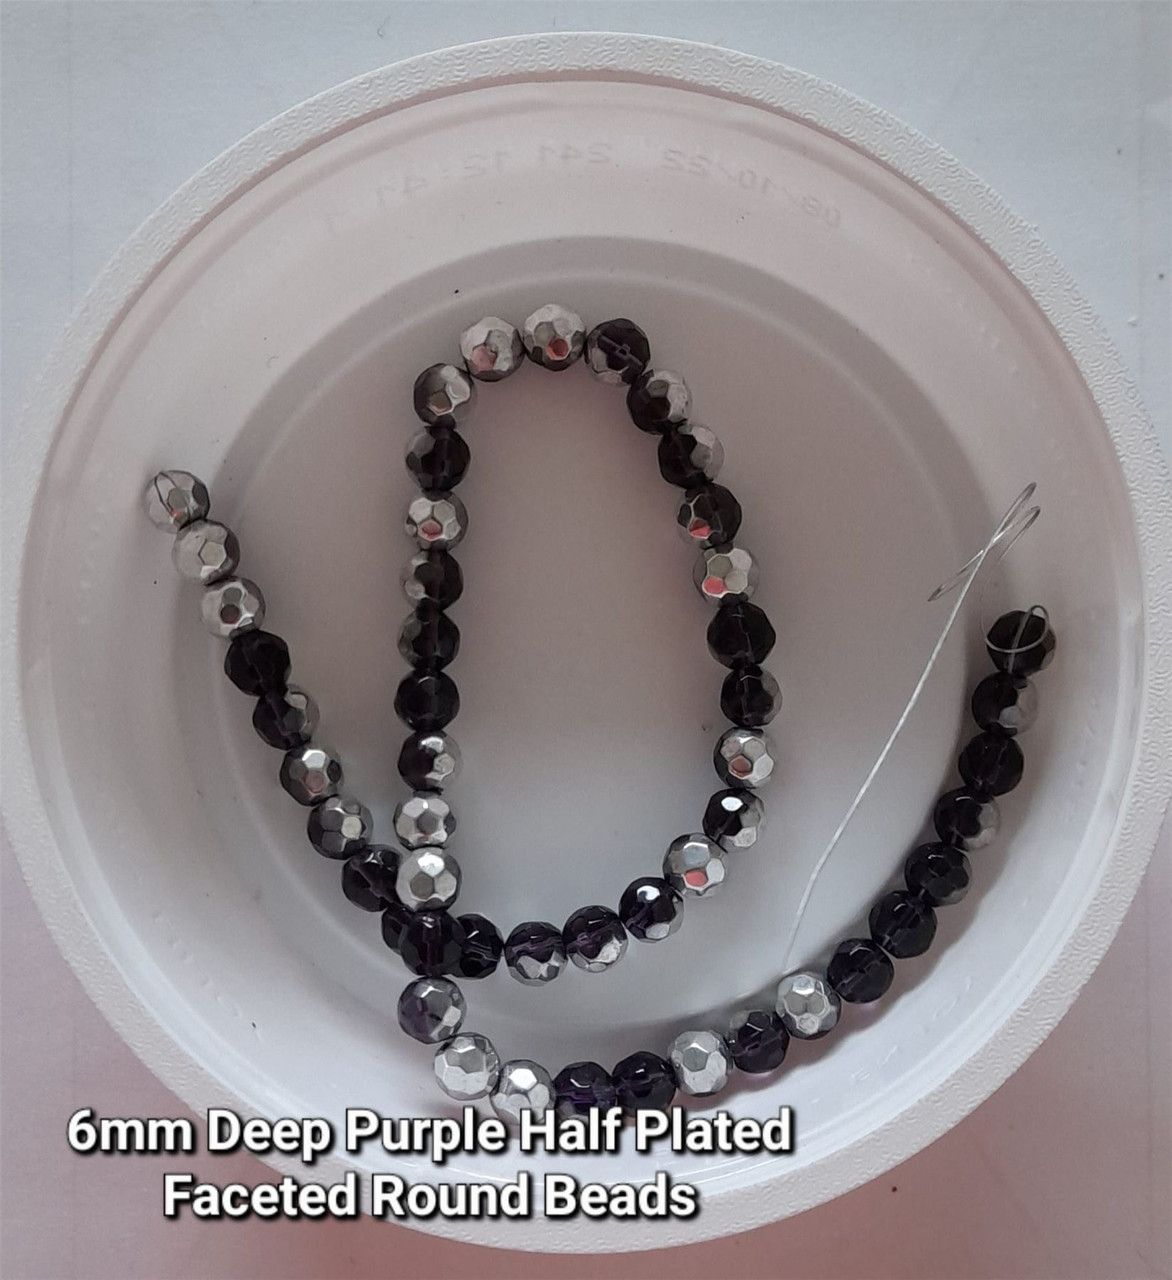 Strand of faceted round glass beads - approx 6mm, Deep Purple Half-Plated Silver, approx 50 beads, 12in